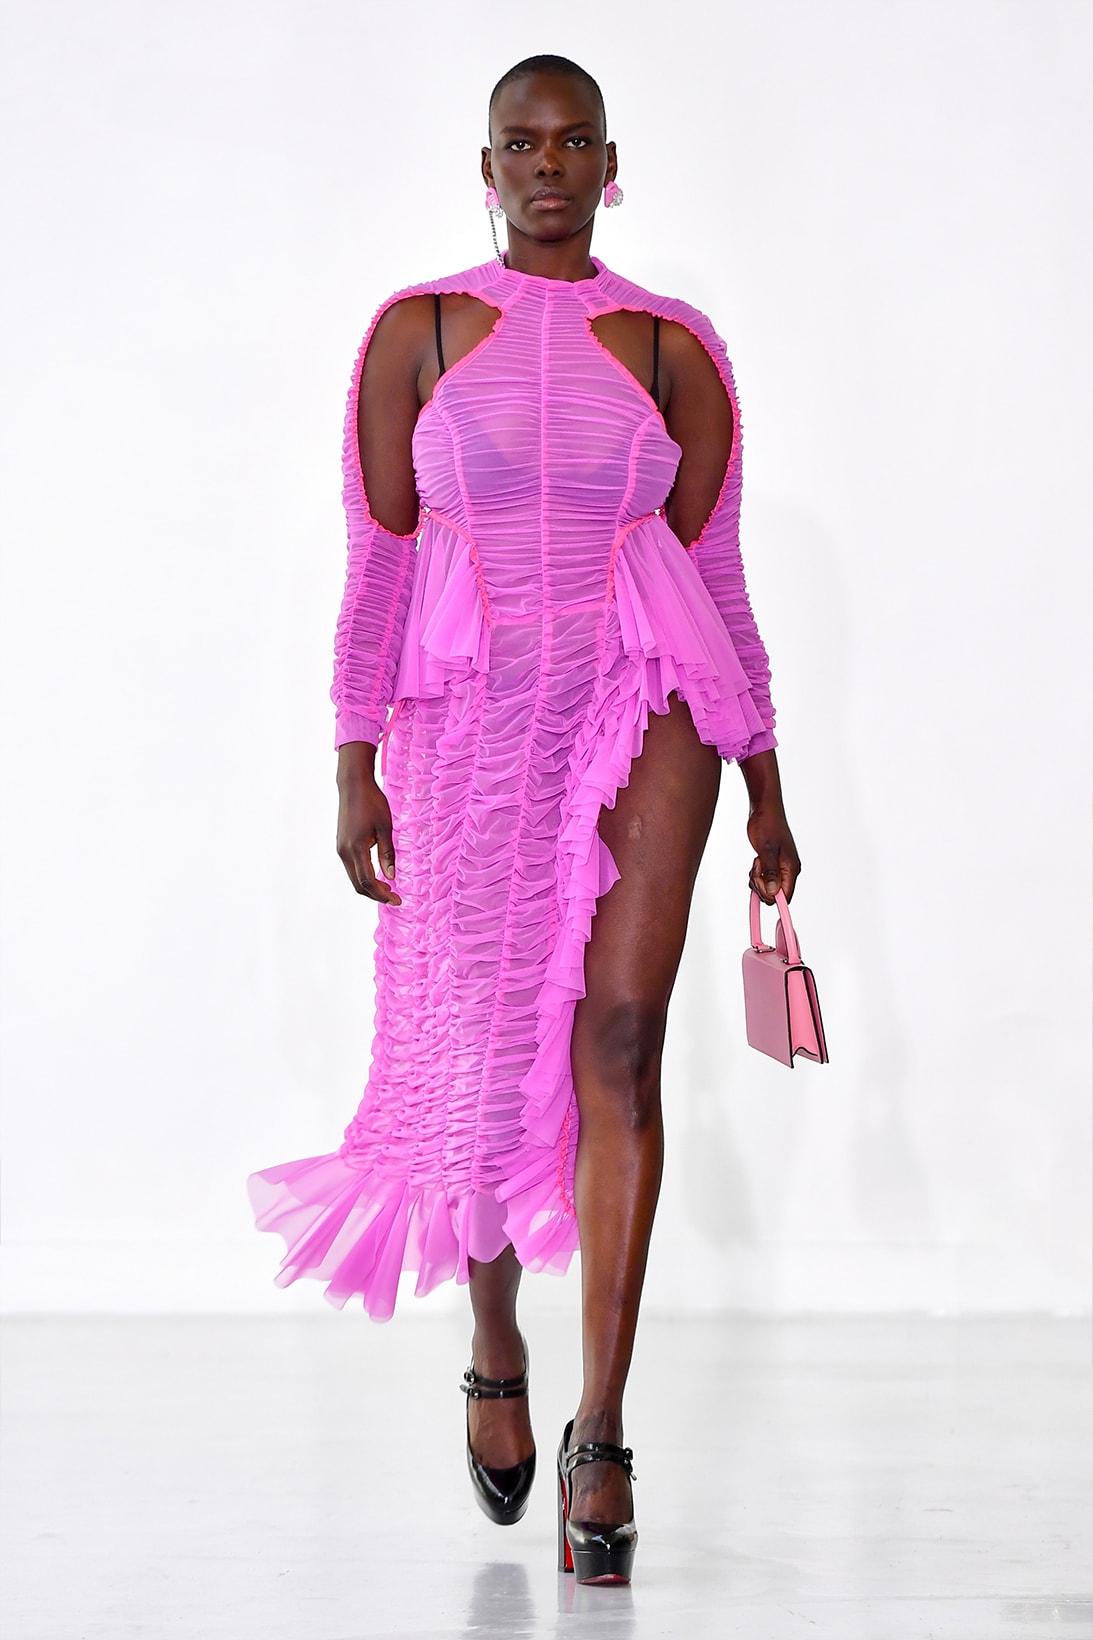 Ester Manas Fall Winter Collection Size Inclusivity Cut-Outs Fashion Week Runway Show Photos Pink Bunched-Up Dress Bags